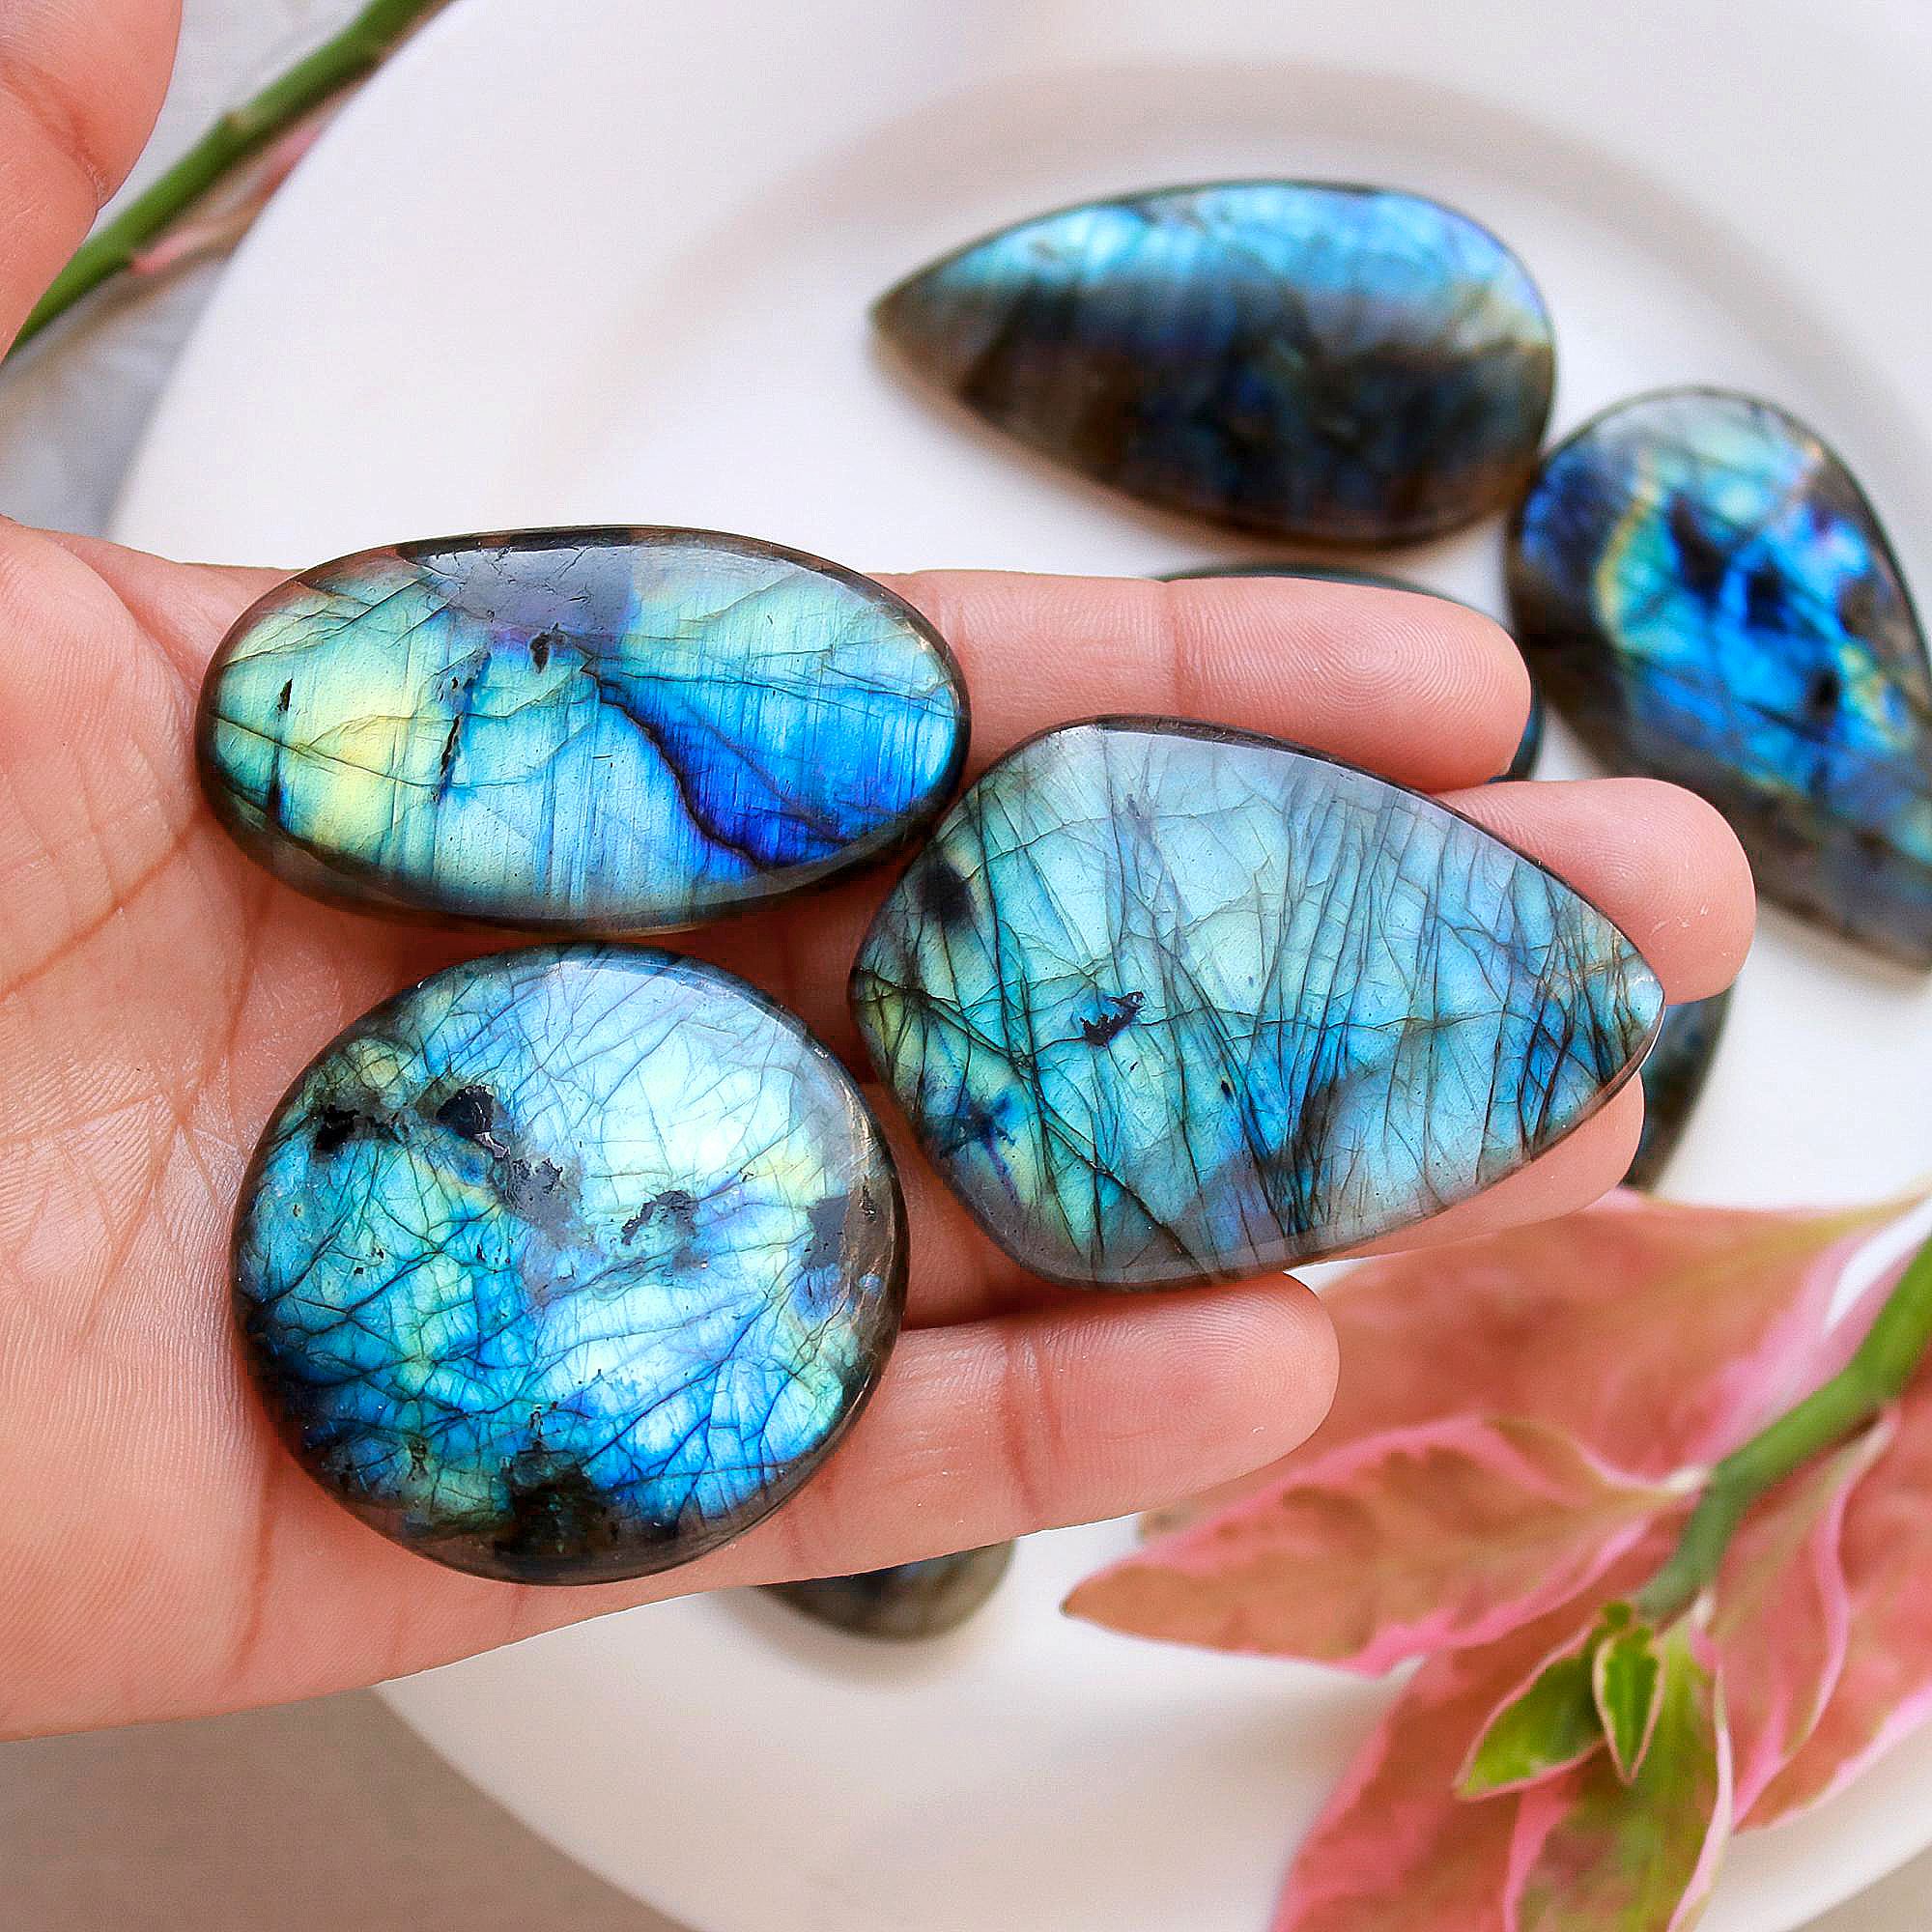 8 Pcs.670 Cts Natural labradorite Cabochon Loose Gemstone For Jewelry Wholesale Lot Size 55x30 40x24mm